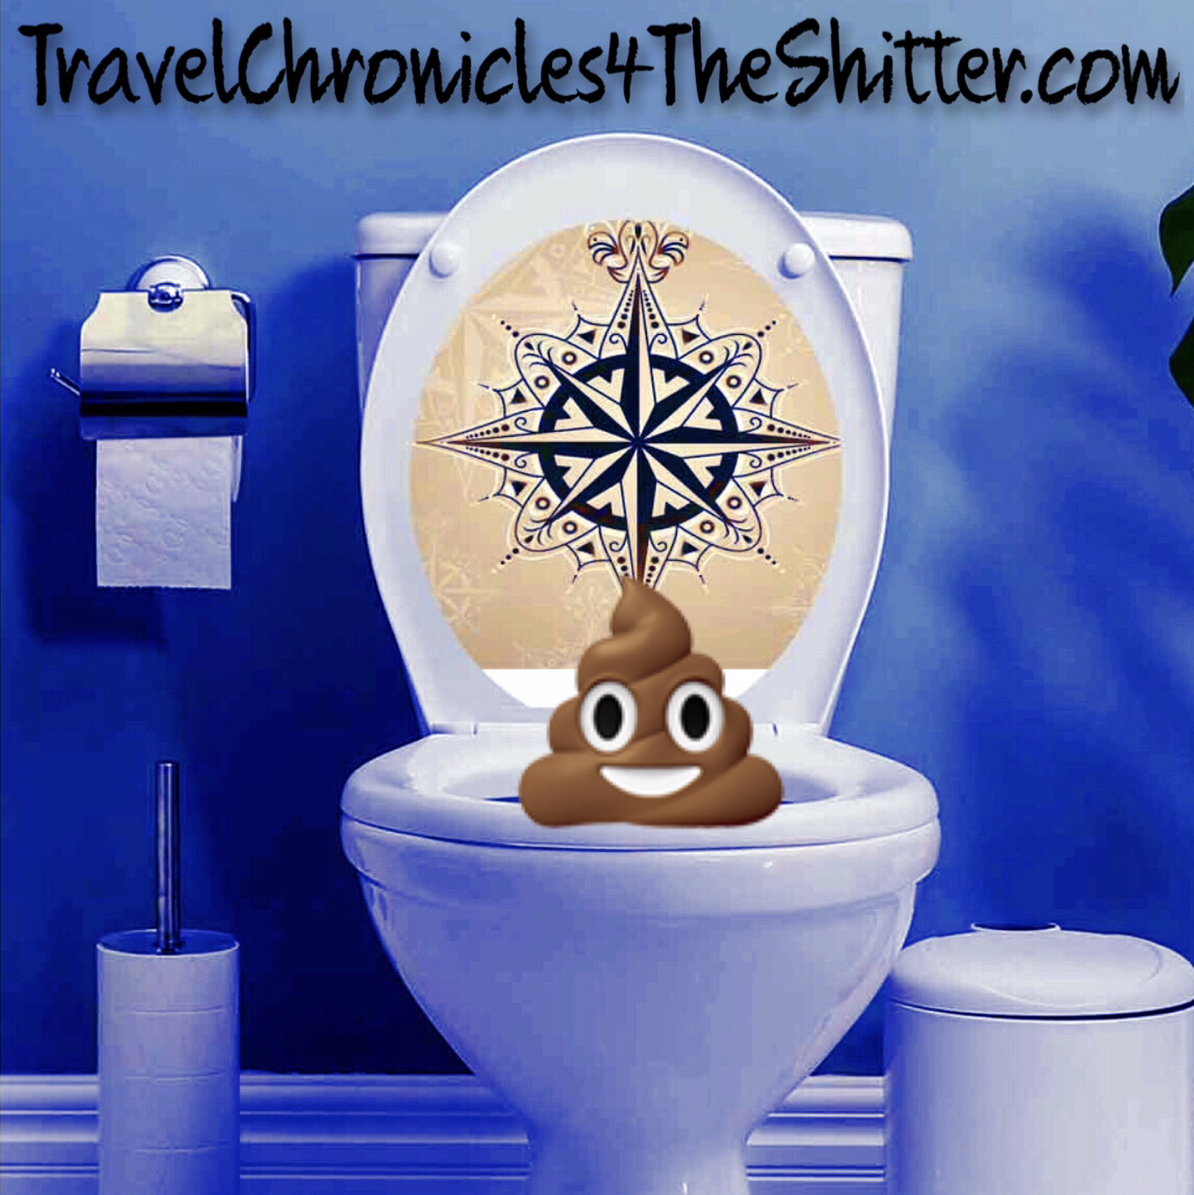 Travel Chronicles 4 The Shitter